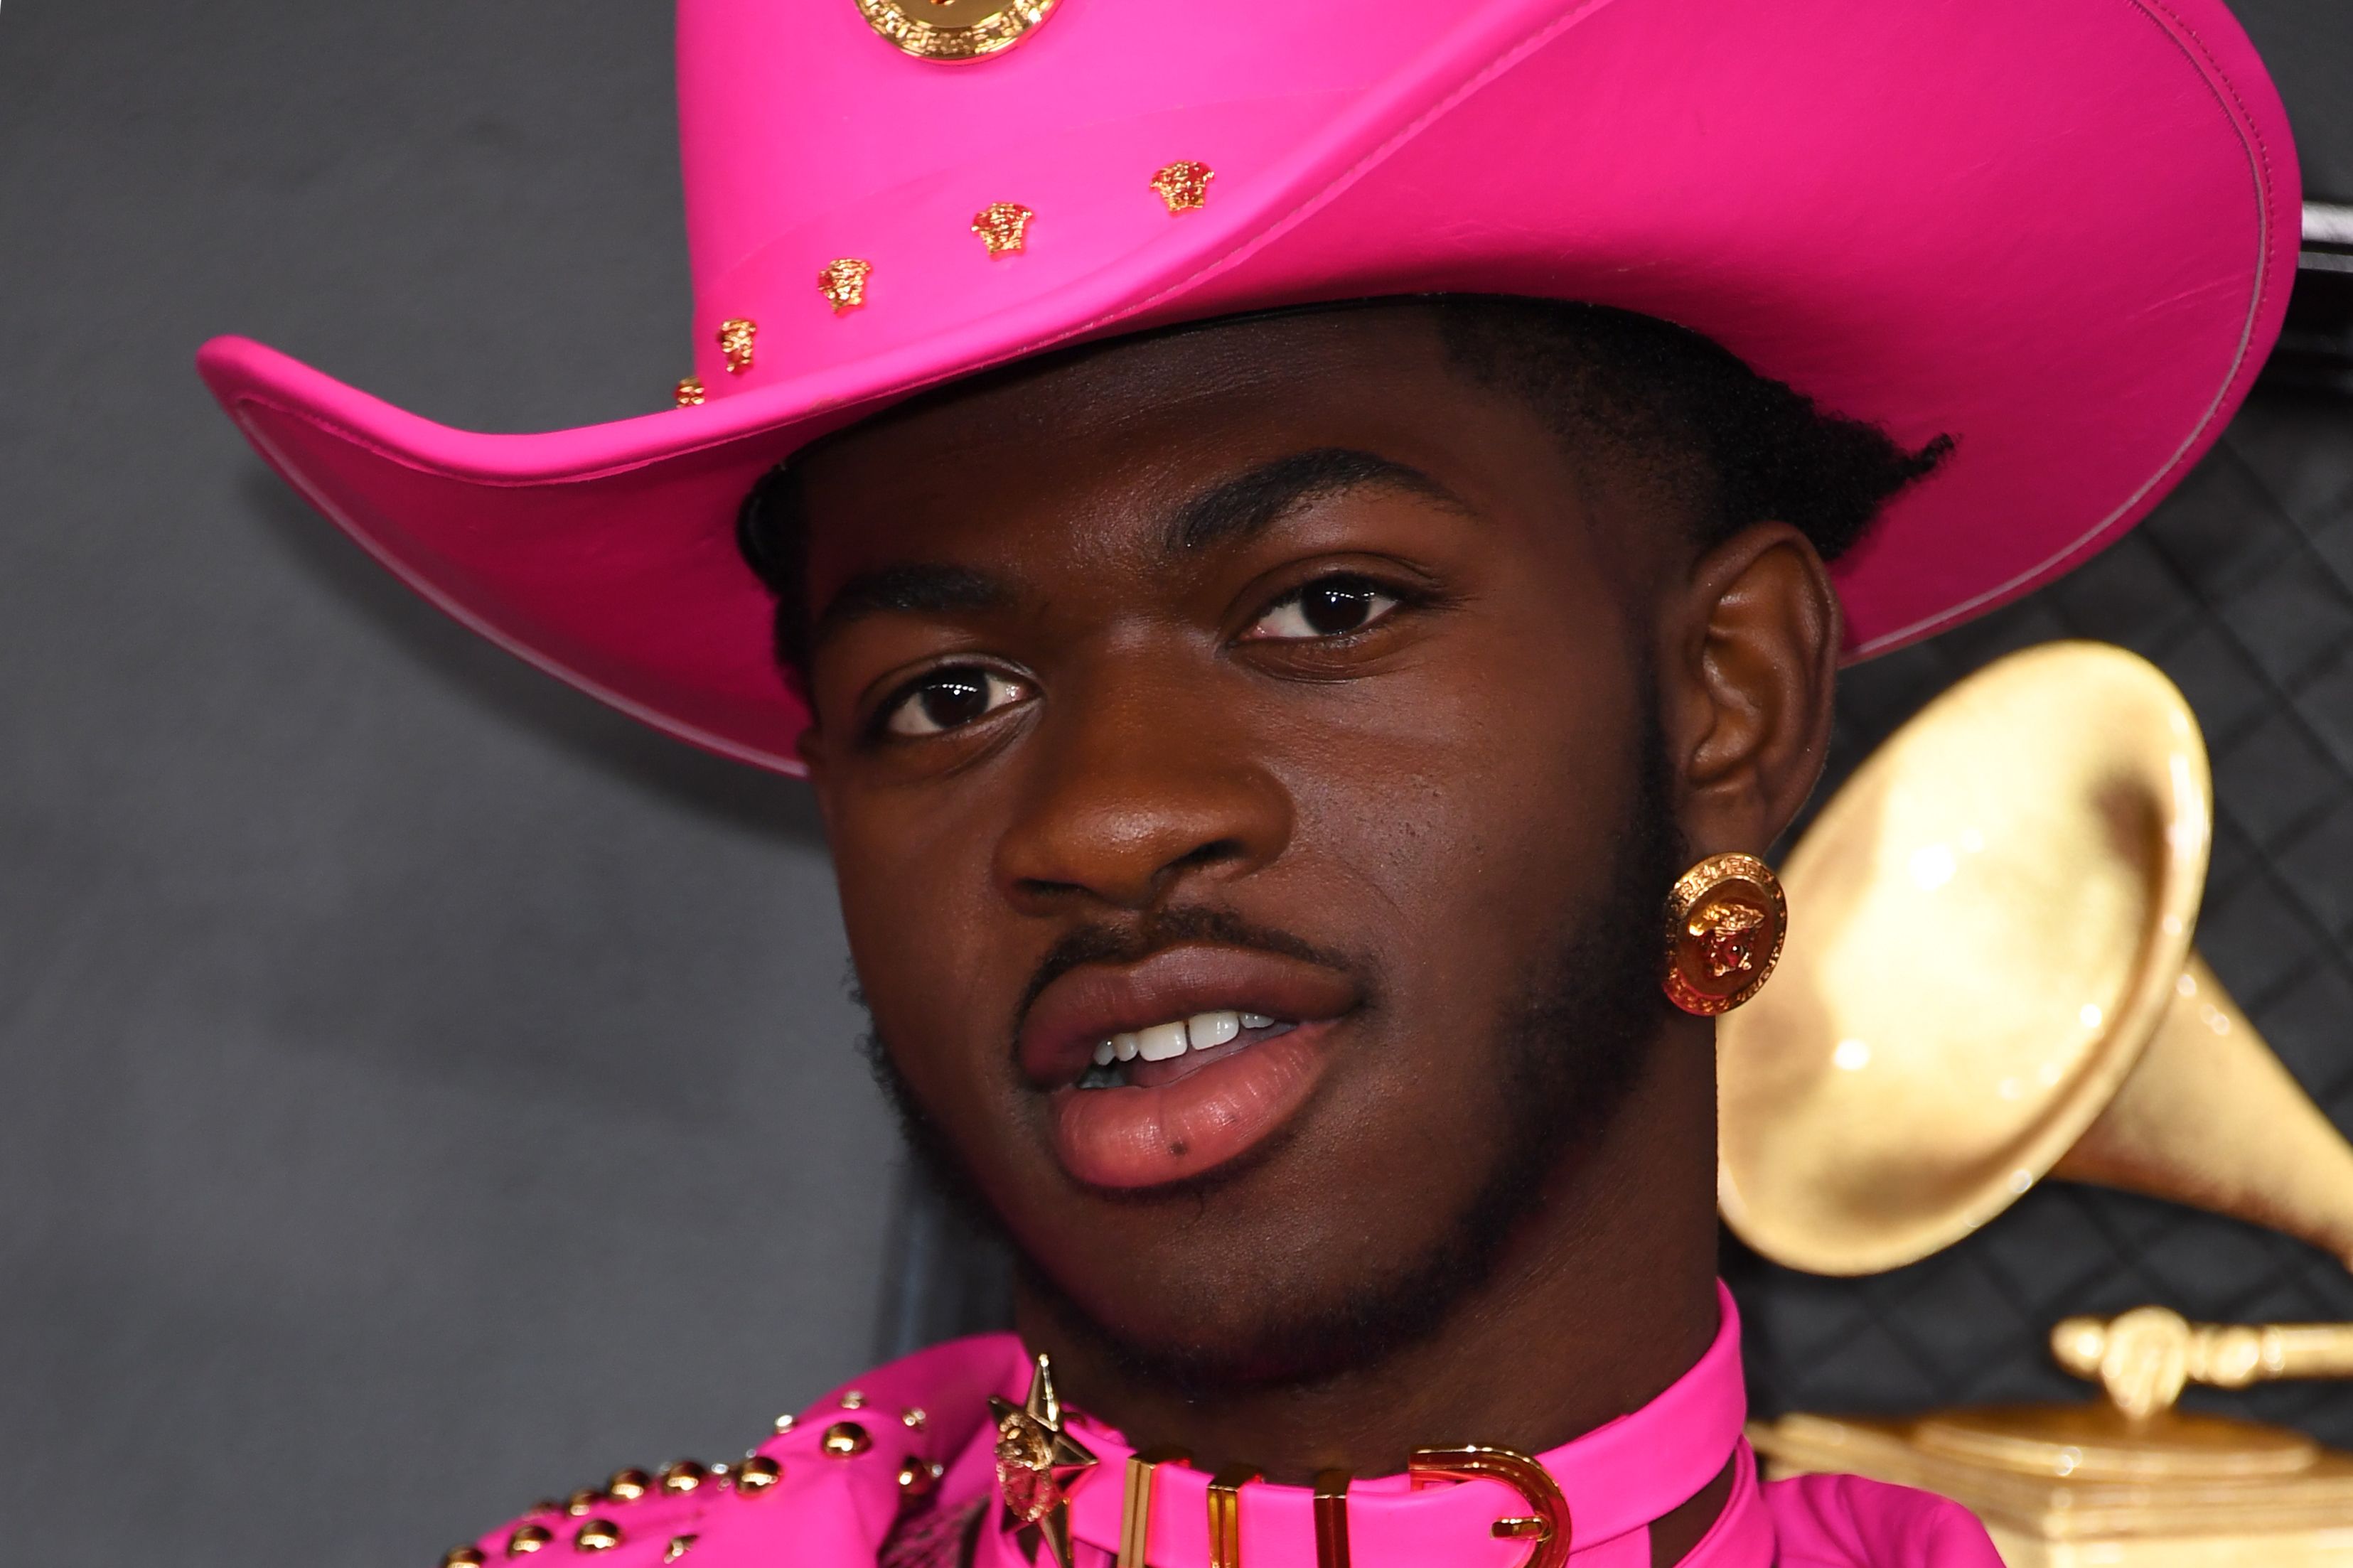 Lil Nas X wearing a pink hat poses for photographers.